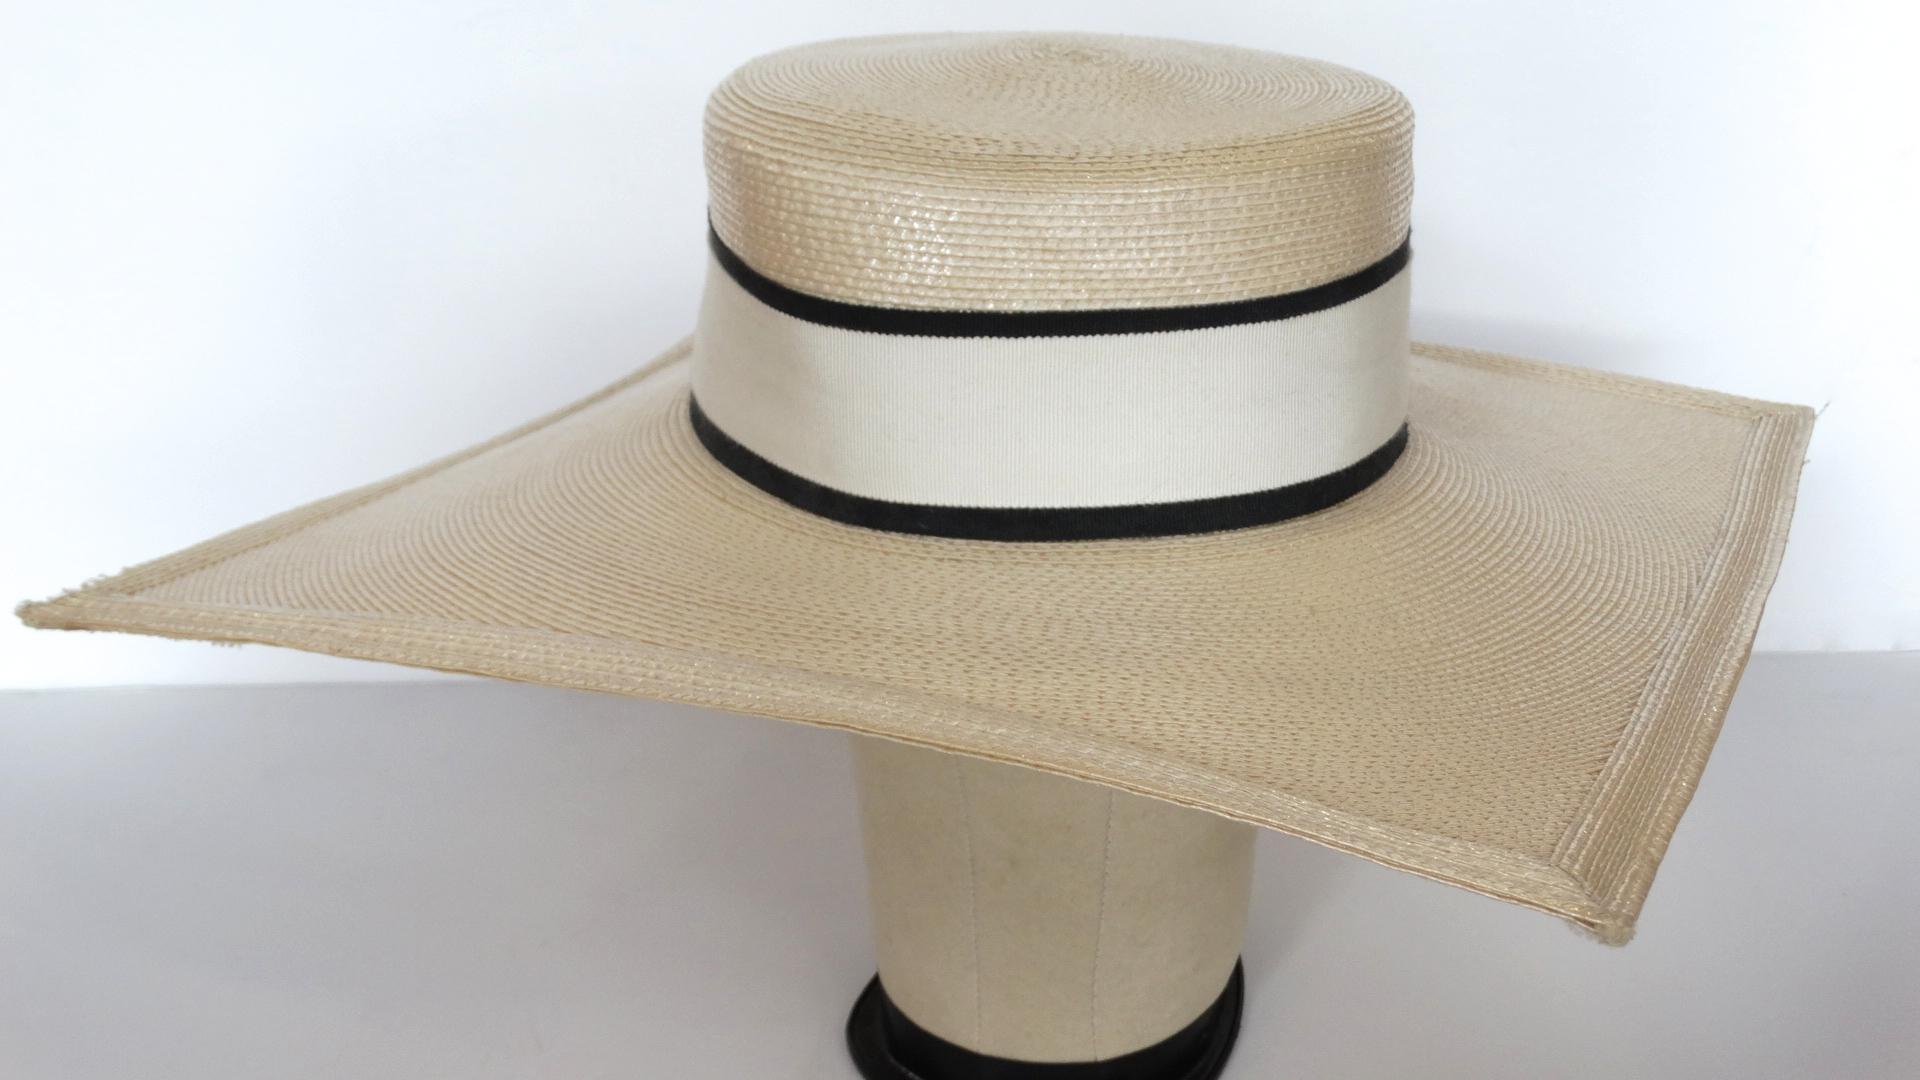 Say Hello To The Most Amazing YSL Hat! Circa early 1970s, this hat is a classic boater with a unique square shape brim. Features a large white ribbon with black trim around the crown. Two removable fascinators are included on the interior trim for a